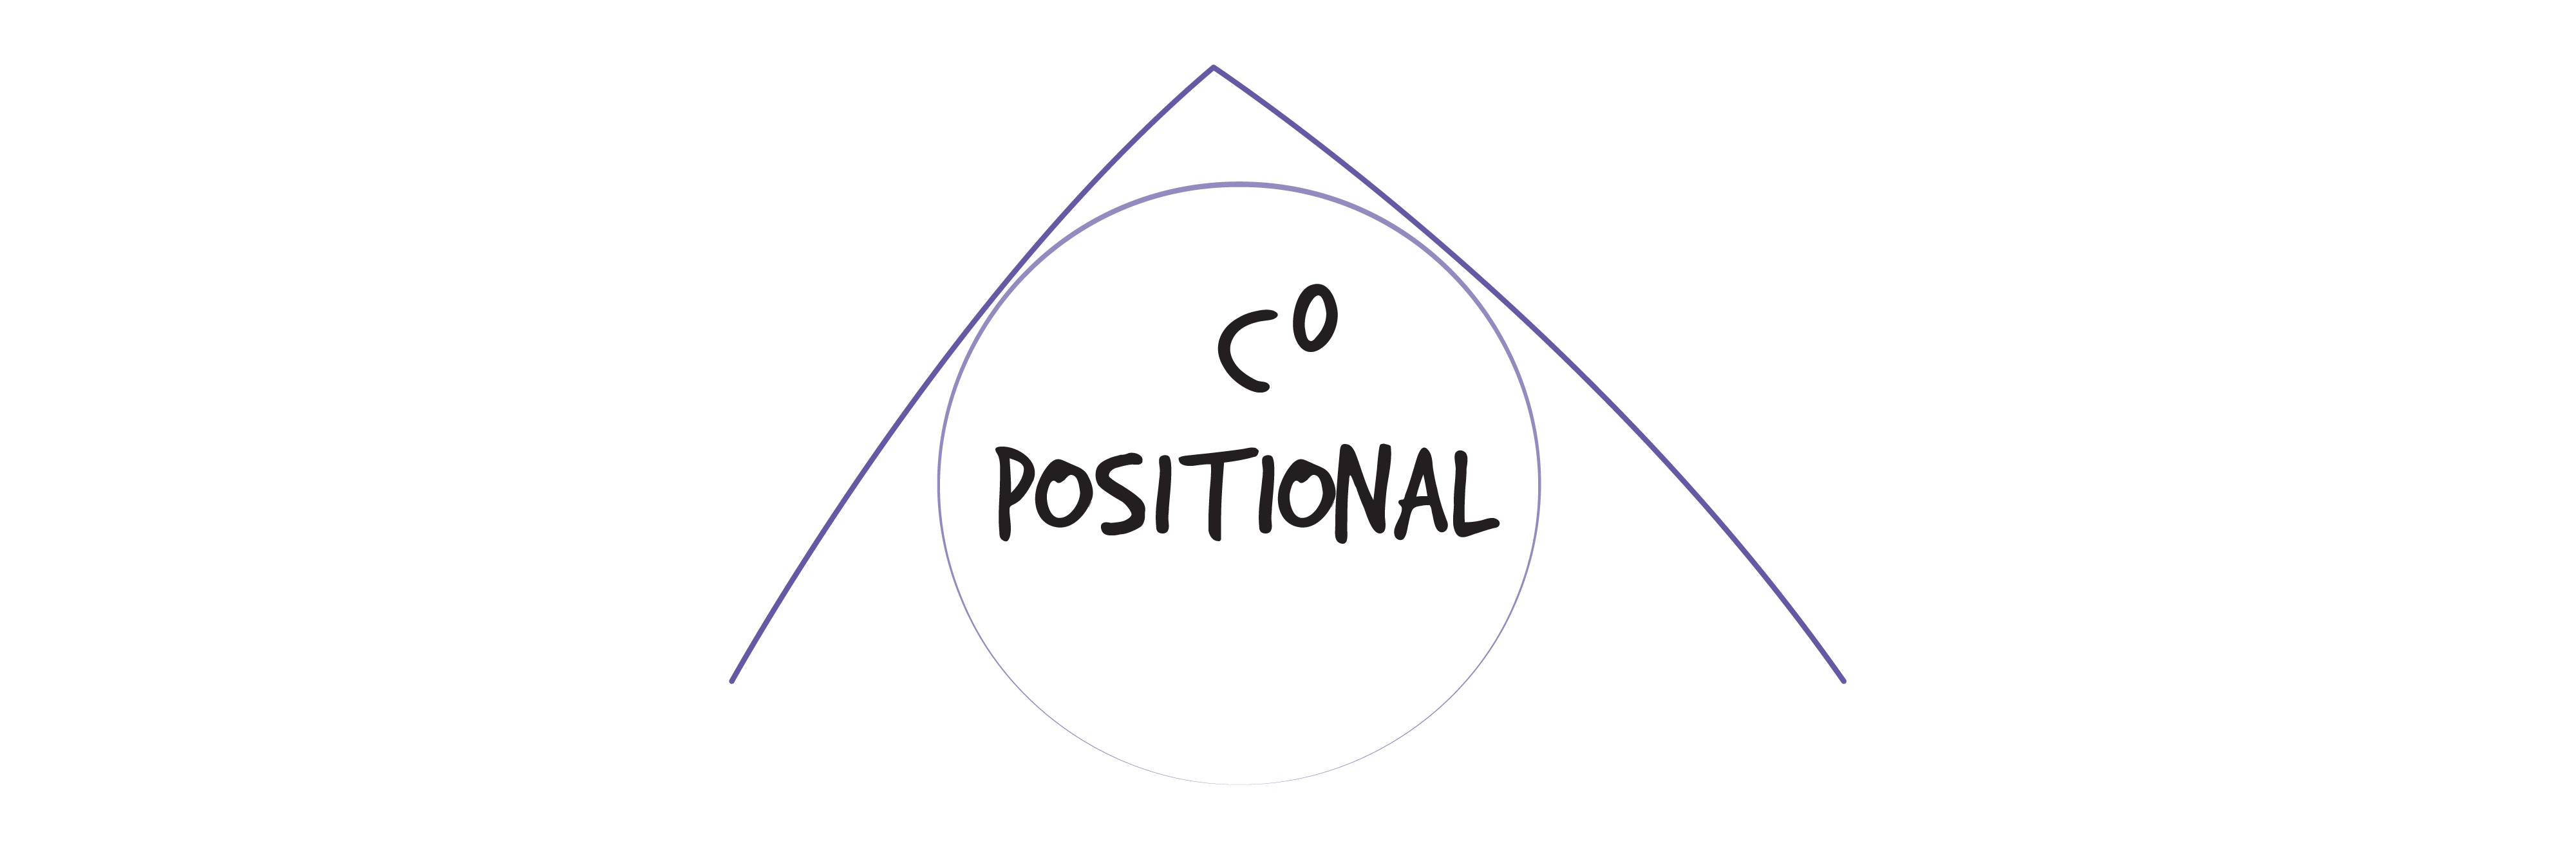 This illustration shows C0 positional, as shown in the text of the image. The horizontal edge meets the vertical edge with a sharp line.